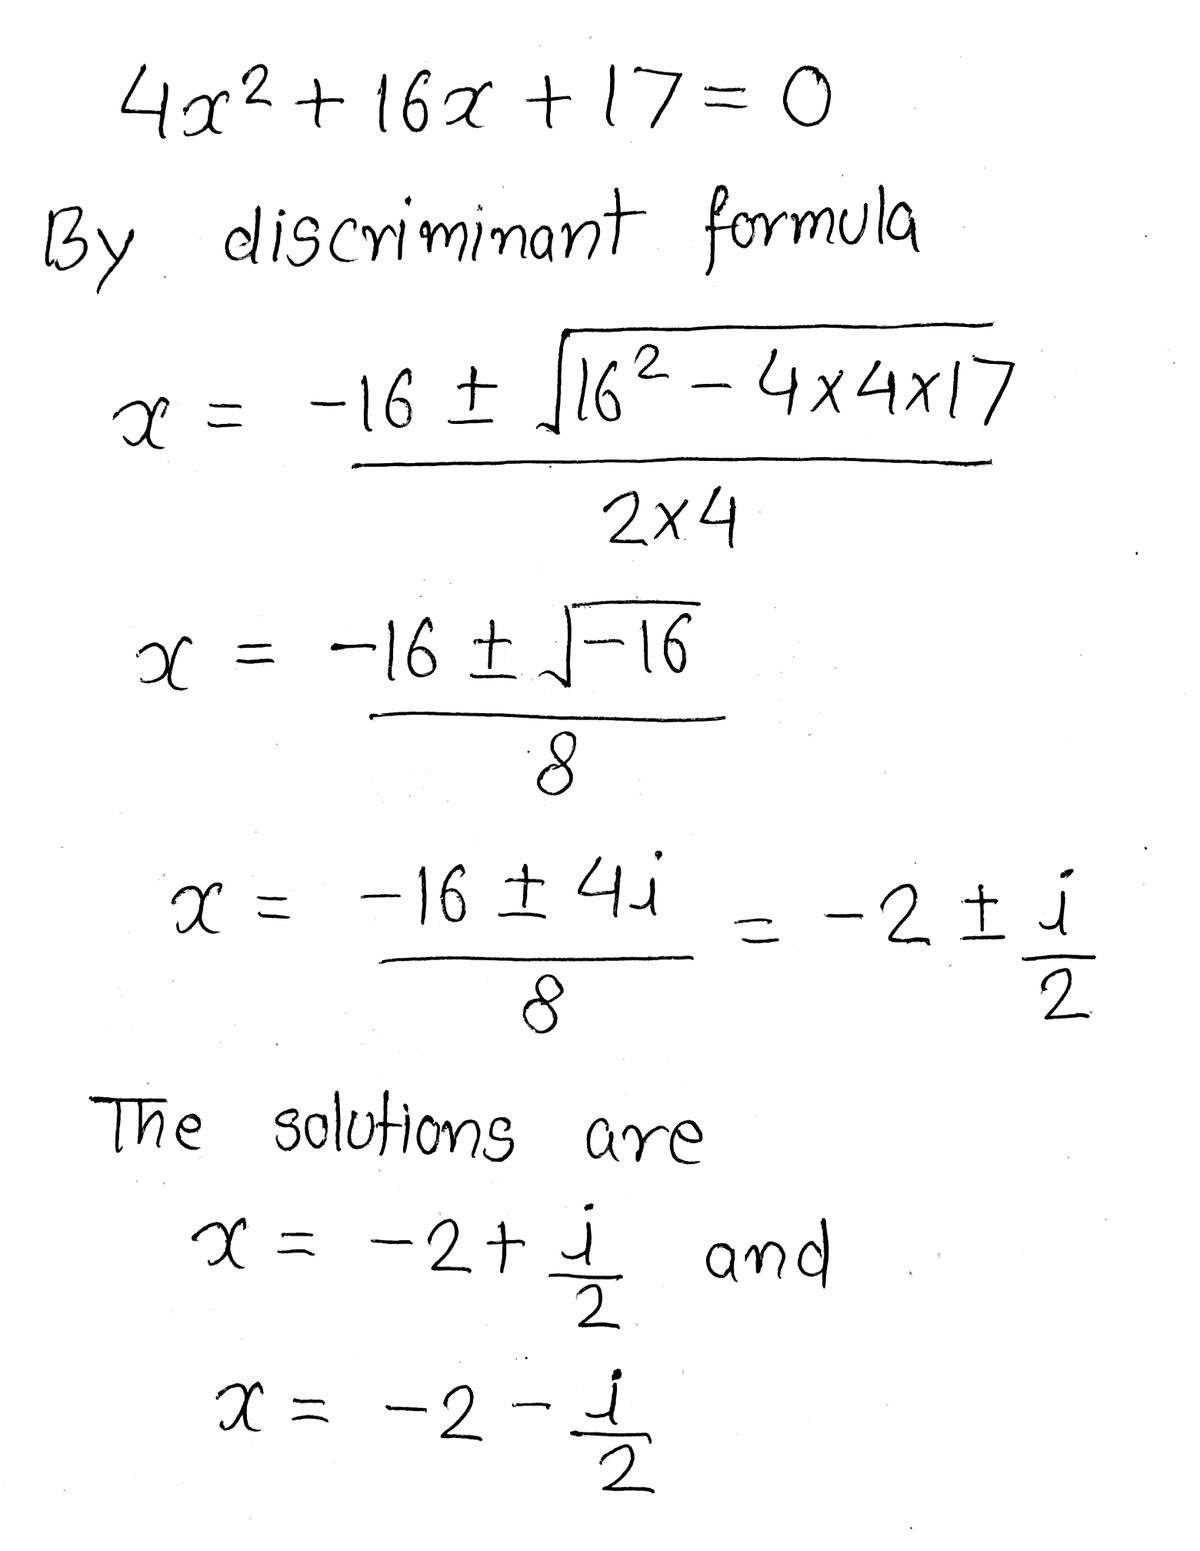 Example 7 - Find discriminant of 2x2 - 4x + 3 = 0 - Examples